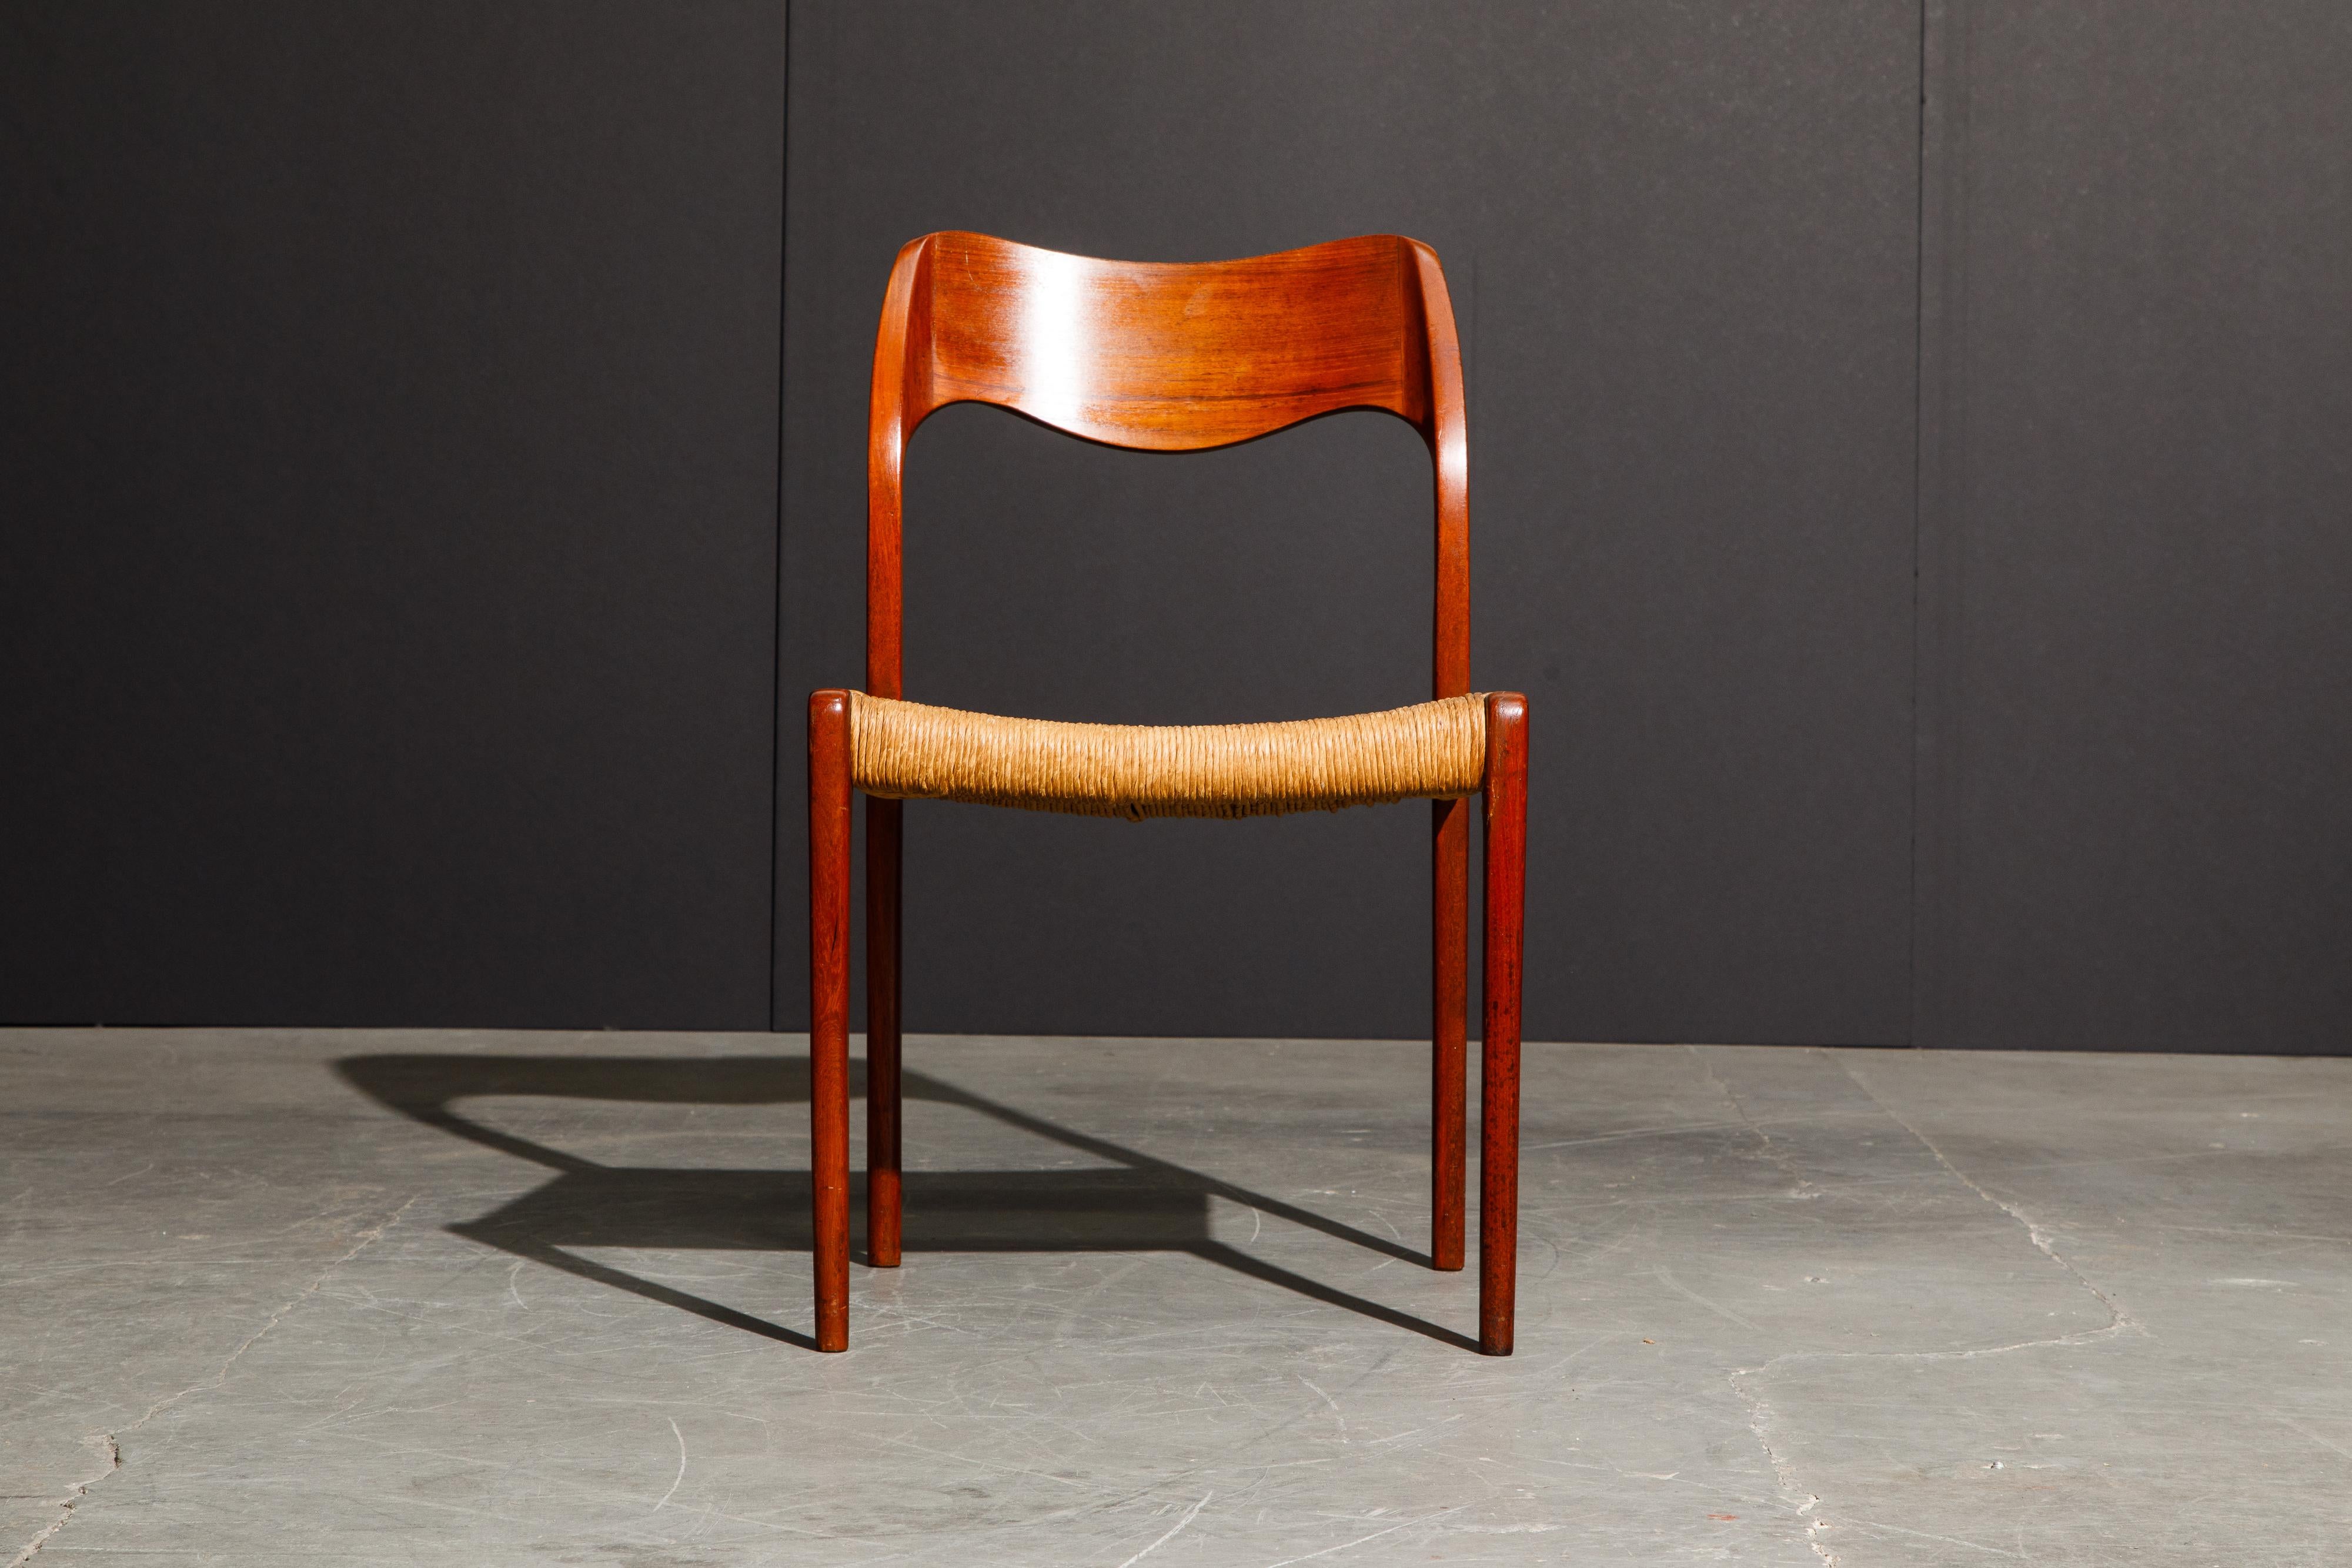 This classic Danish Modern teak side chair is the 'Model 71' designed by Niels O. Møller for J.L. Møllers Møbelfabrik. The teak frame, curved back rest, and original woven cord is striking and stands strong on its own, and also pairs well with other